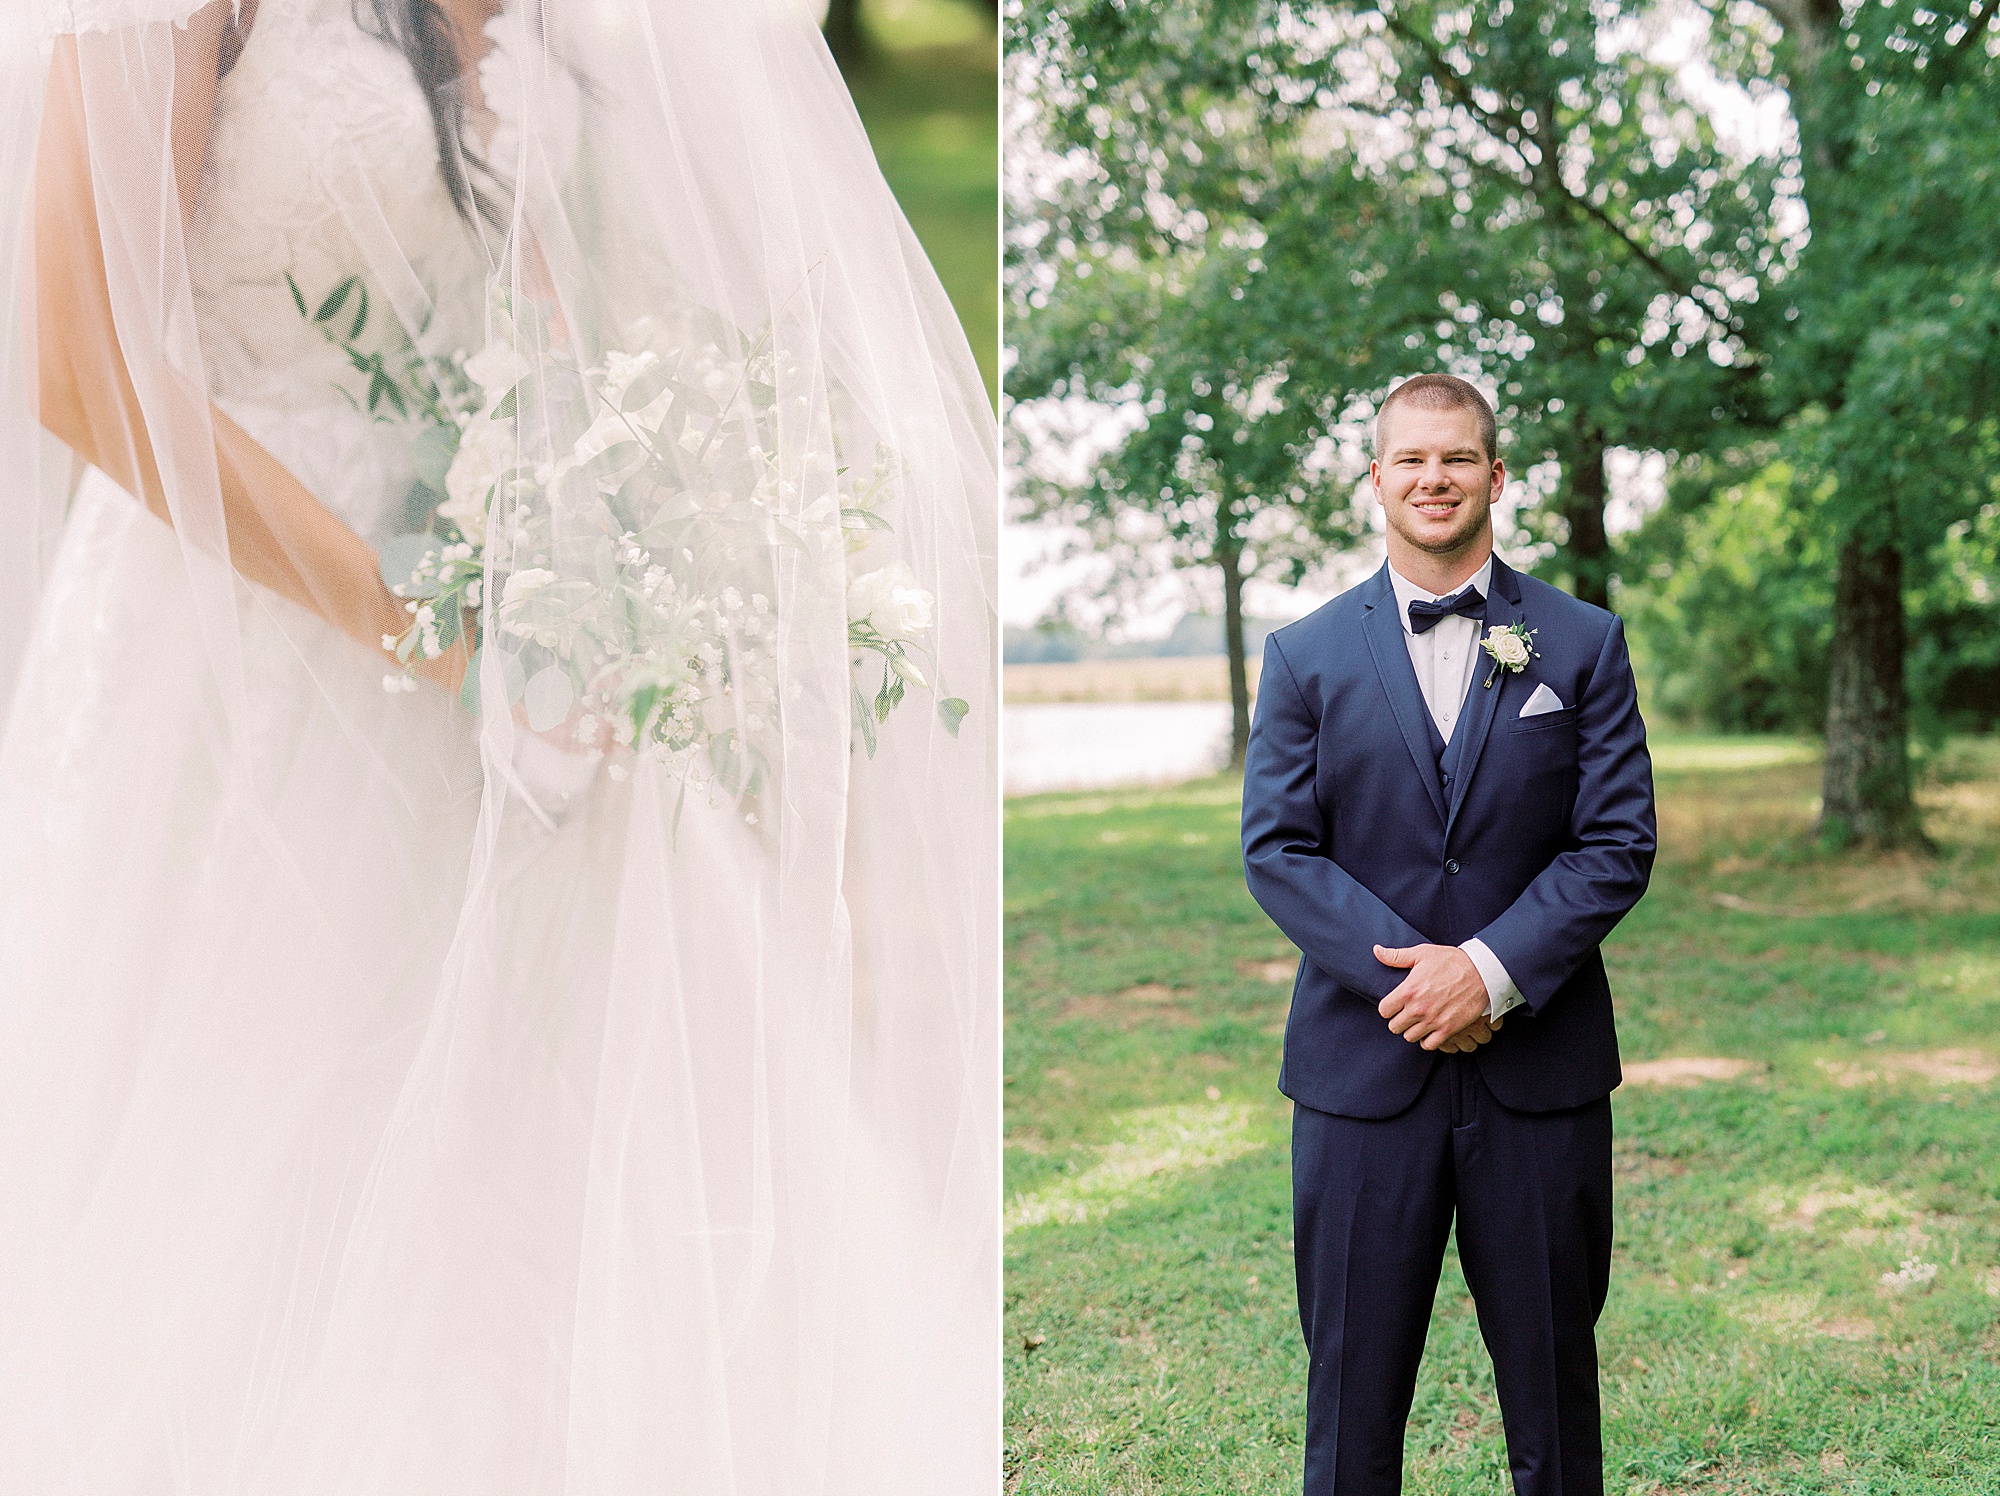 bride and groom's details for fall wedding at The Farmstead